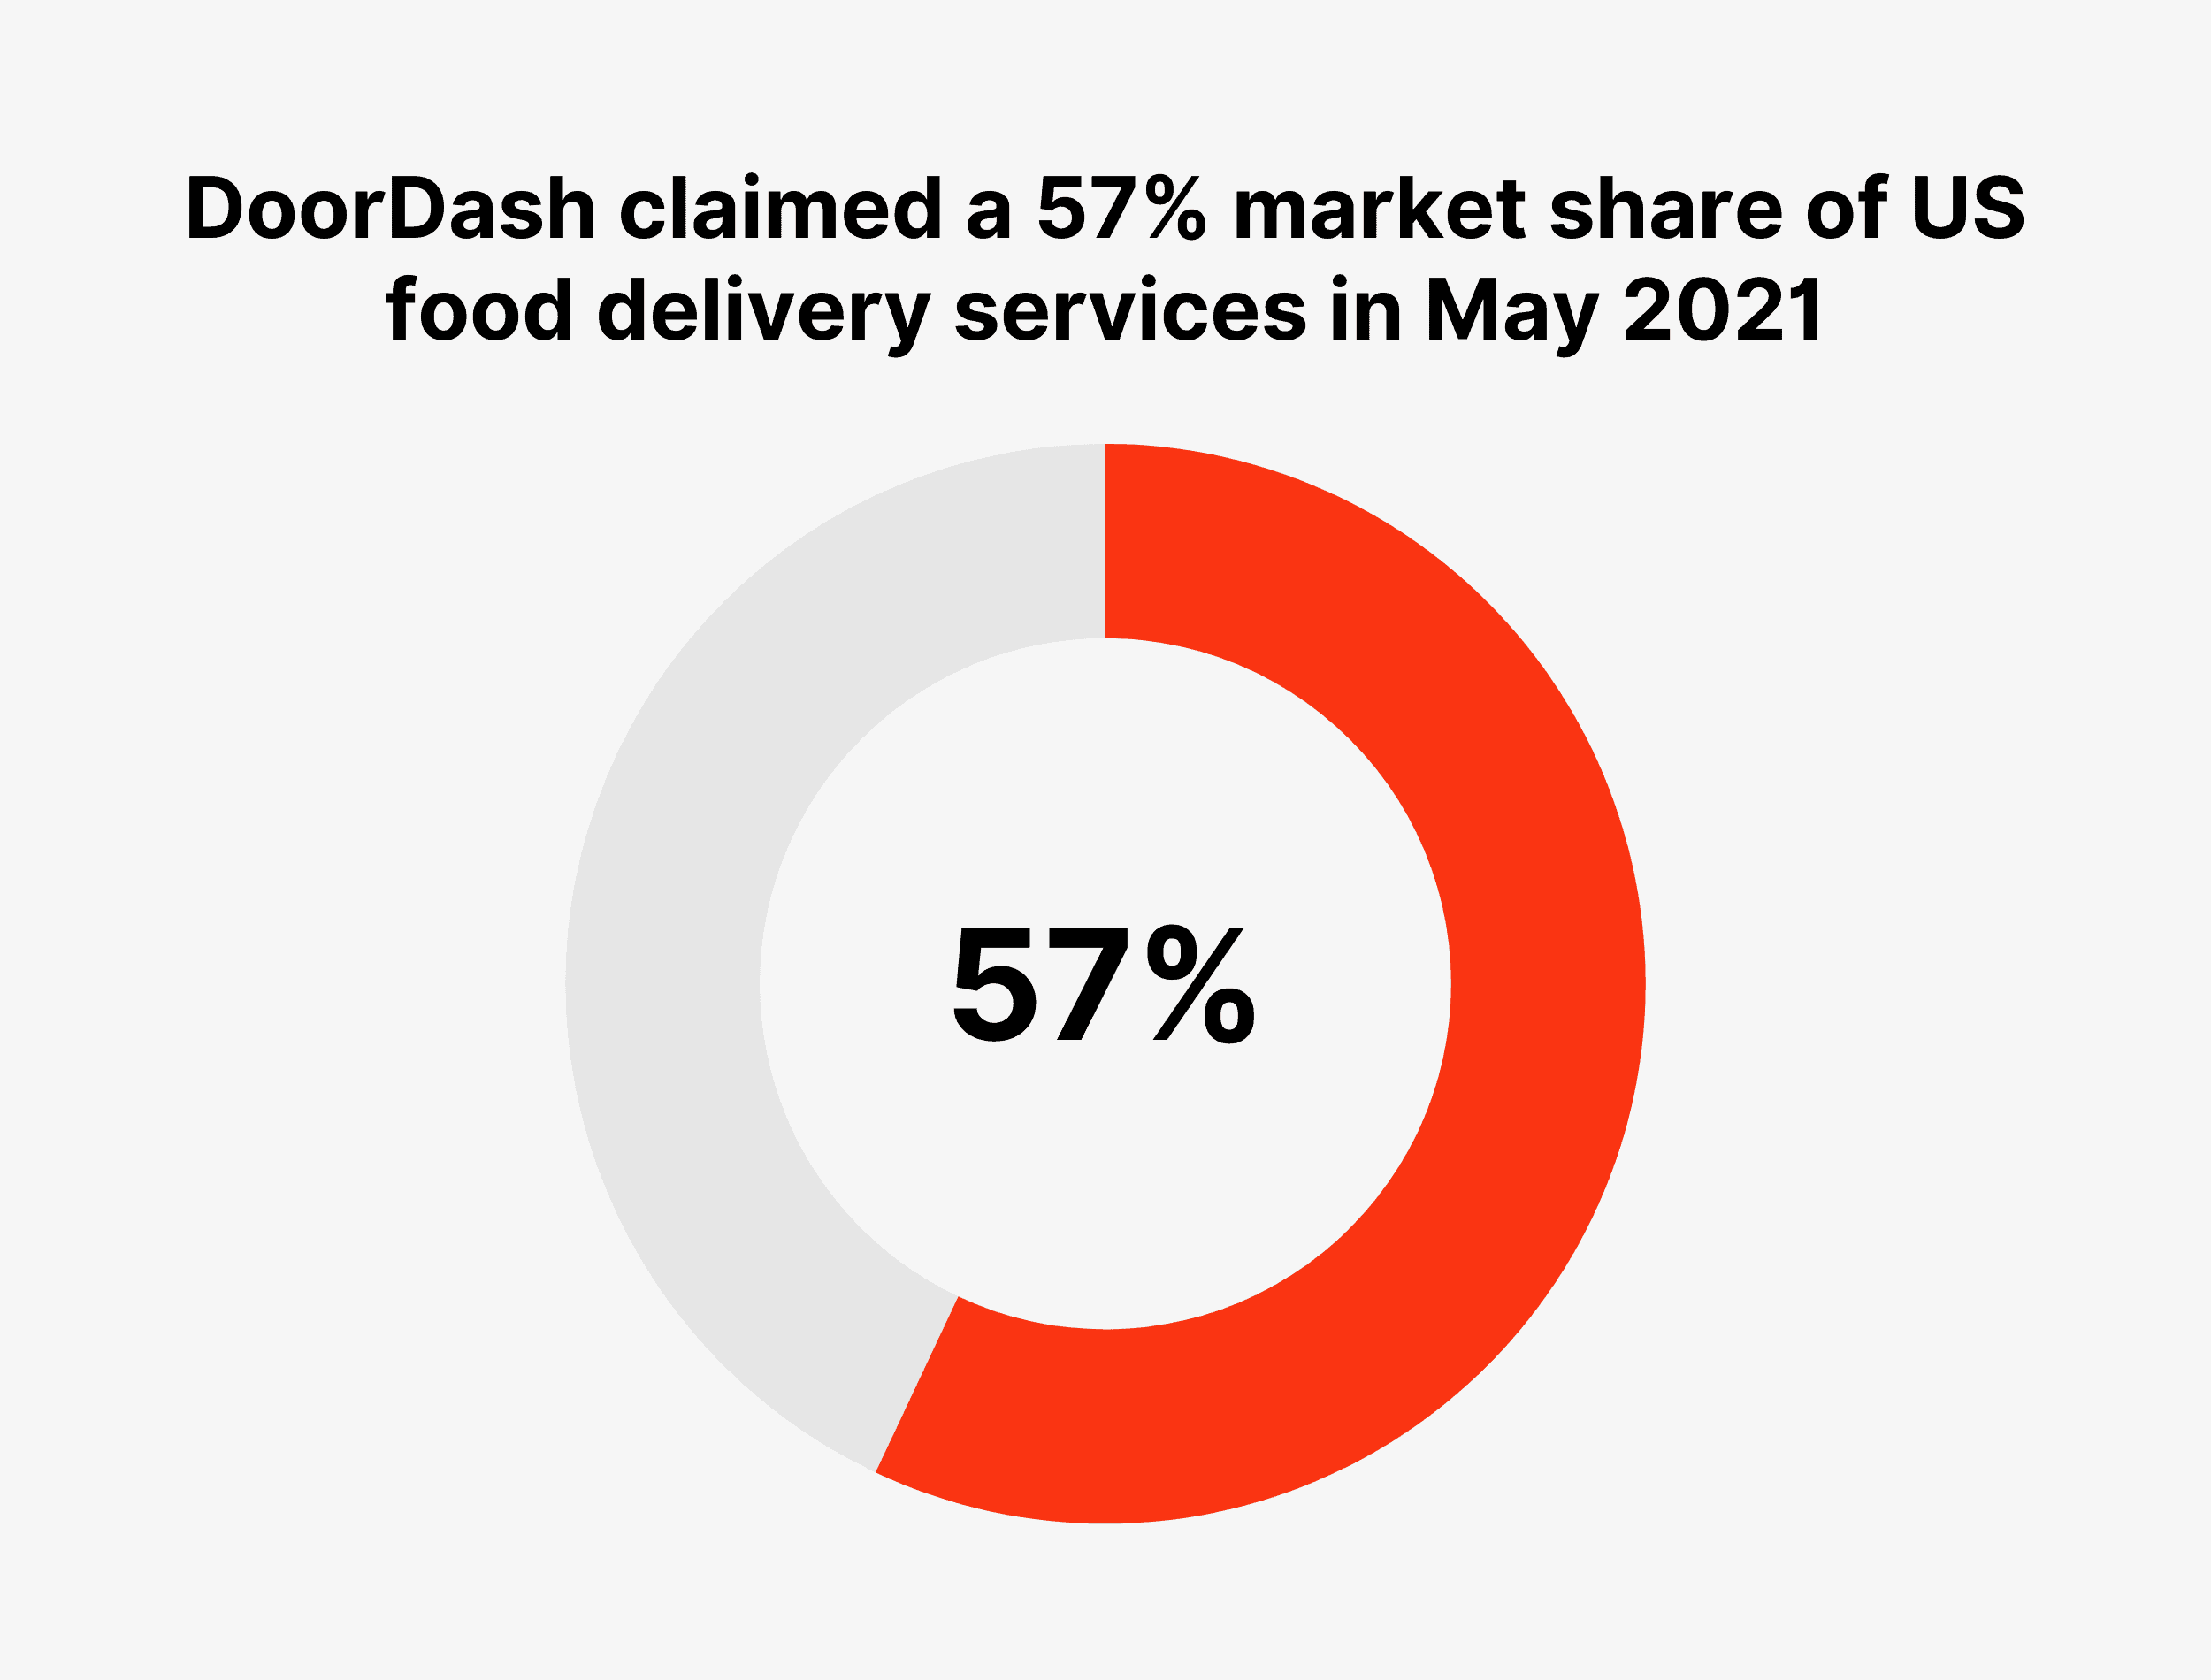 DoorDash claimed a 57% market share of US food delivery services in May 2021